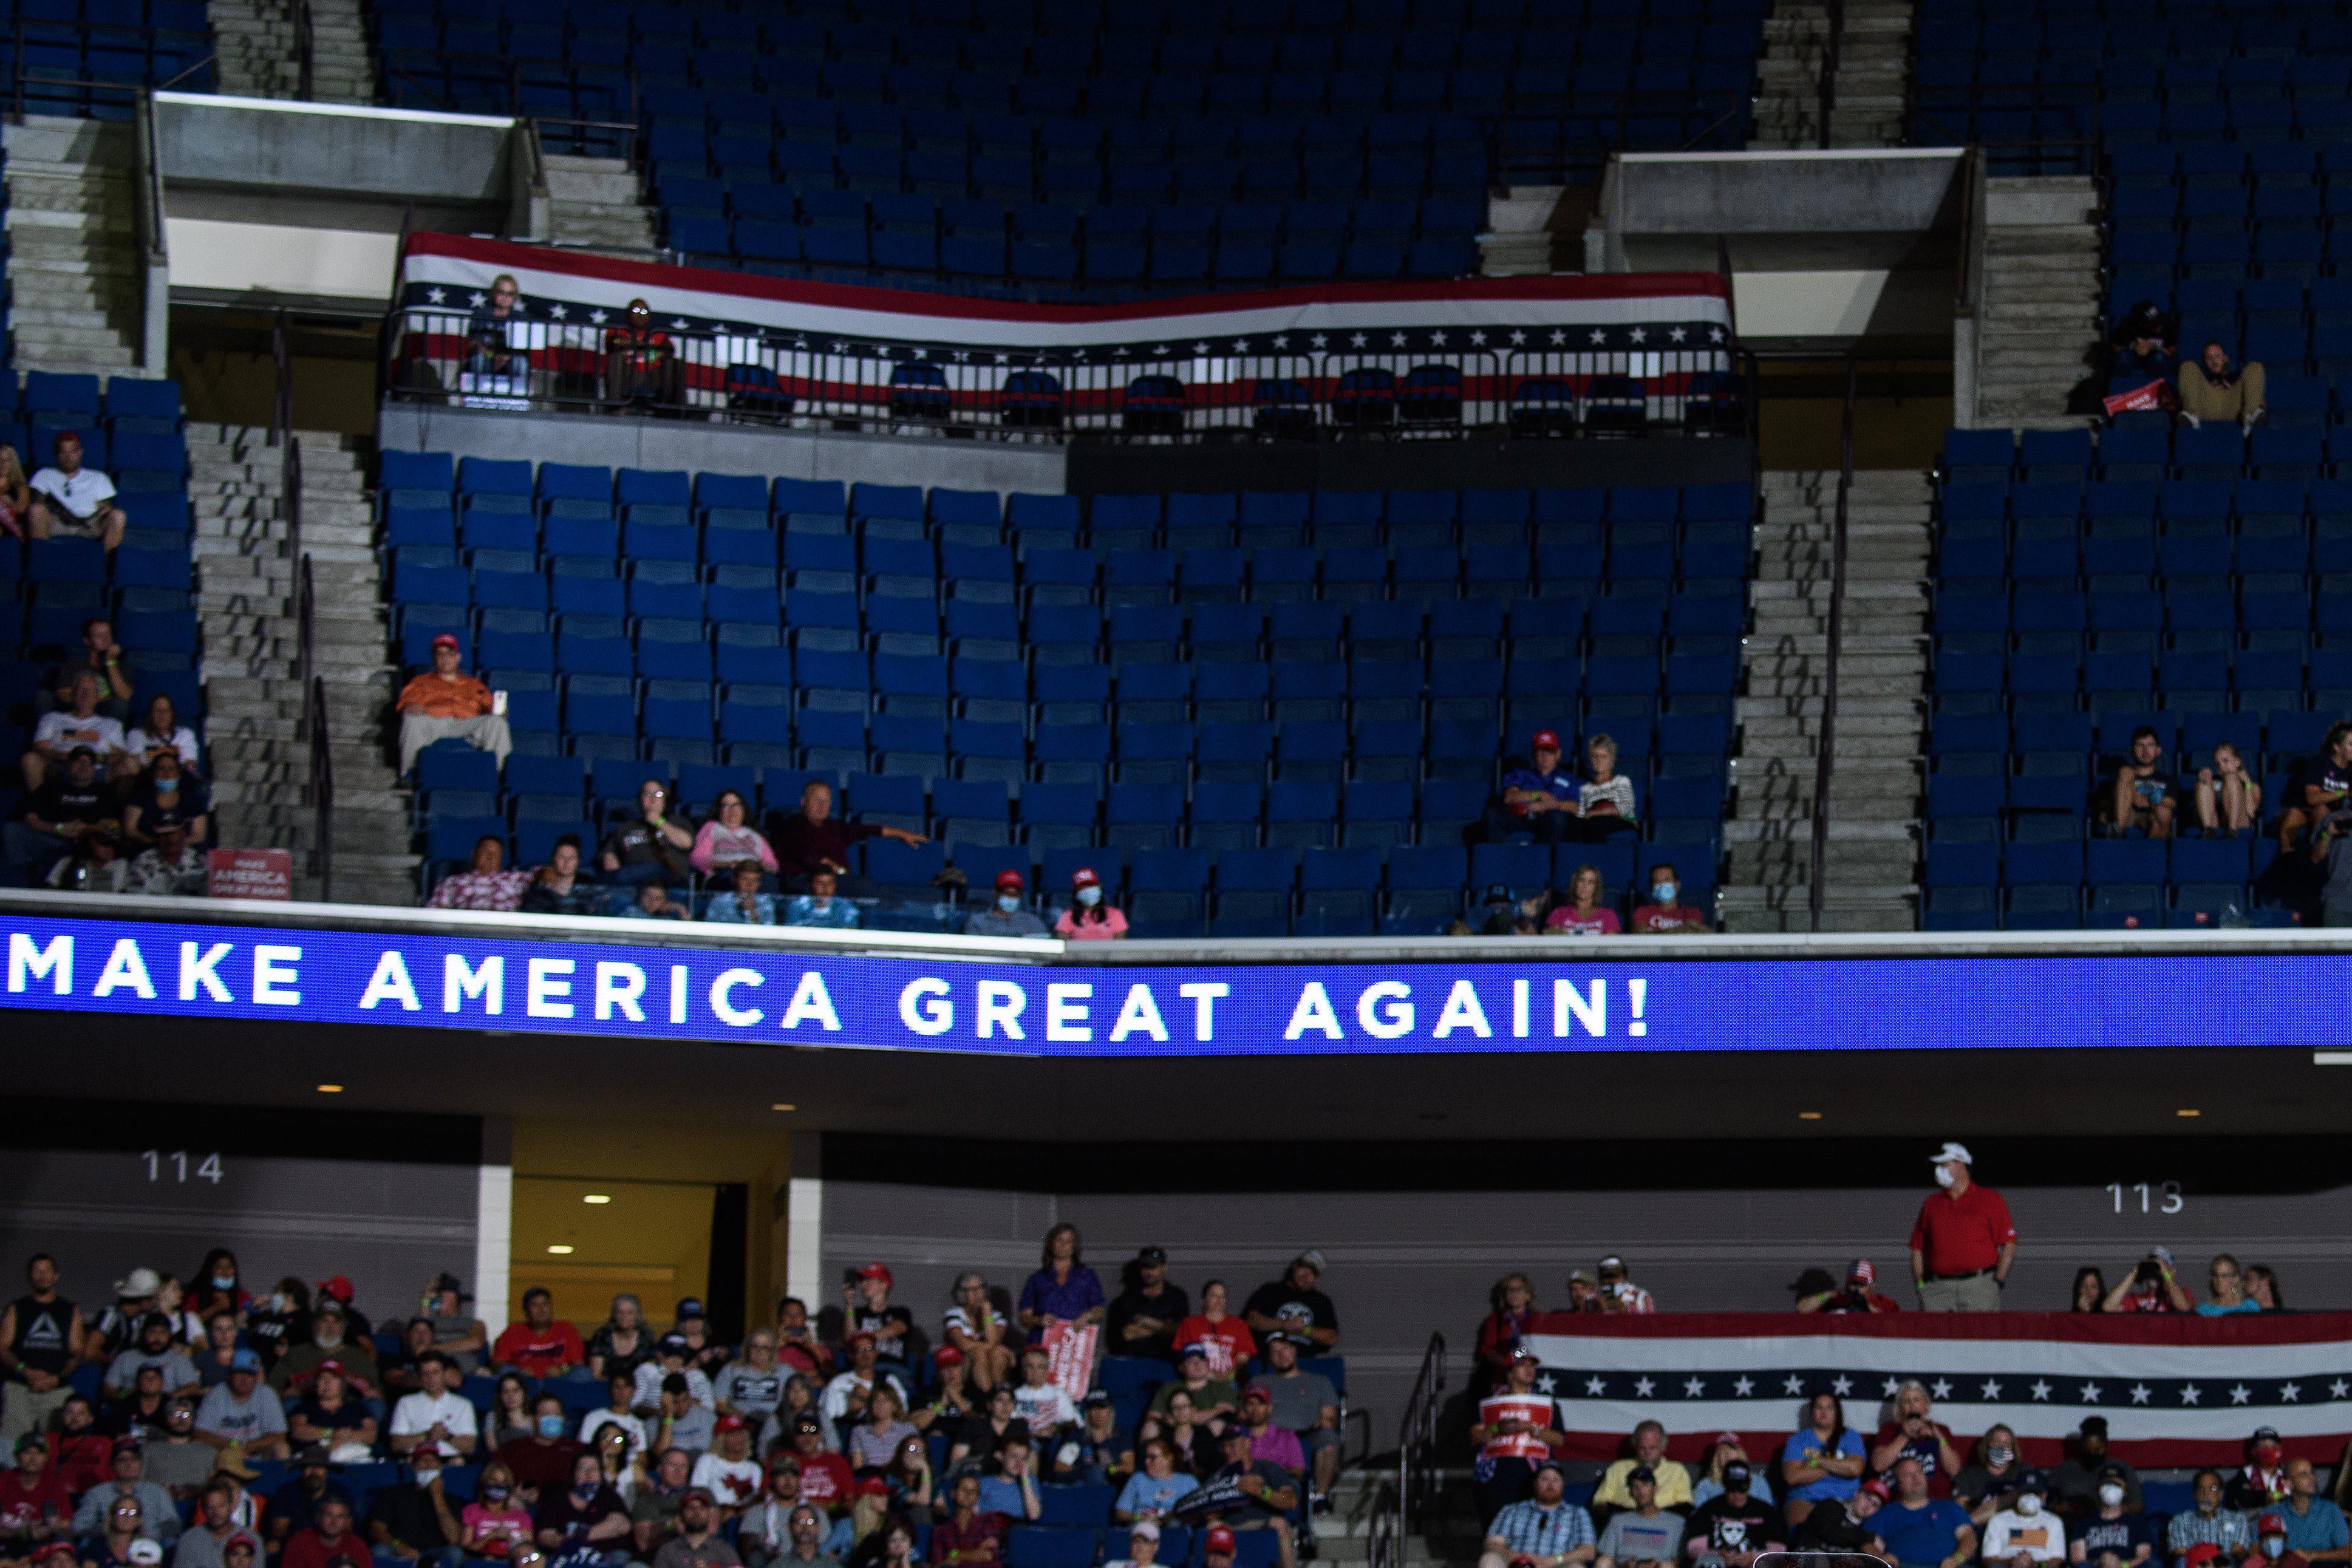 The largely empty upper section of an arena above an electronic sign that says "Make America Great Again."